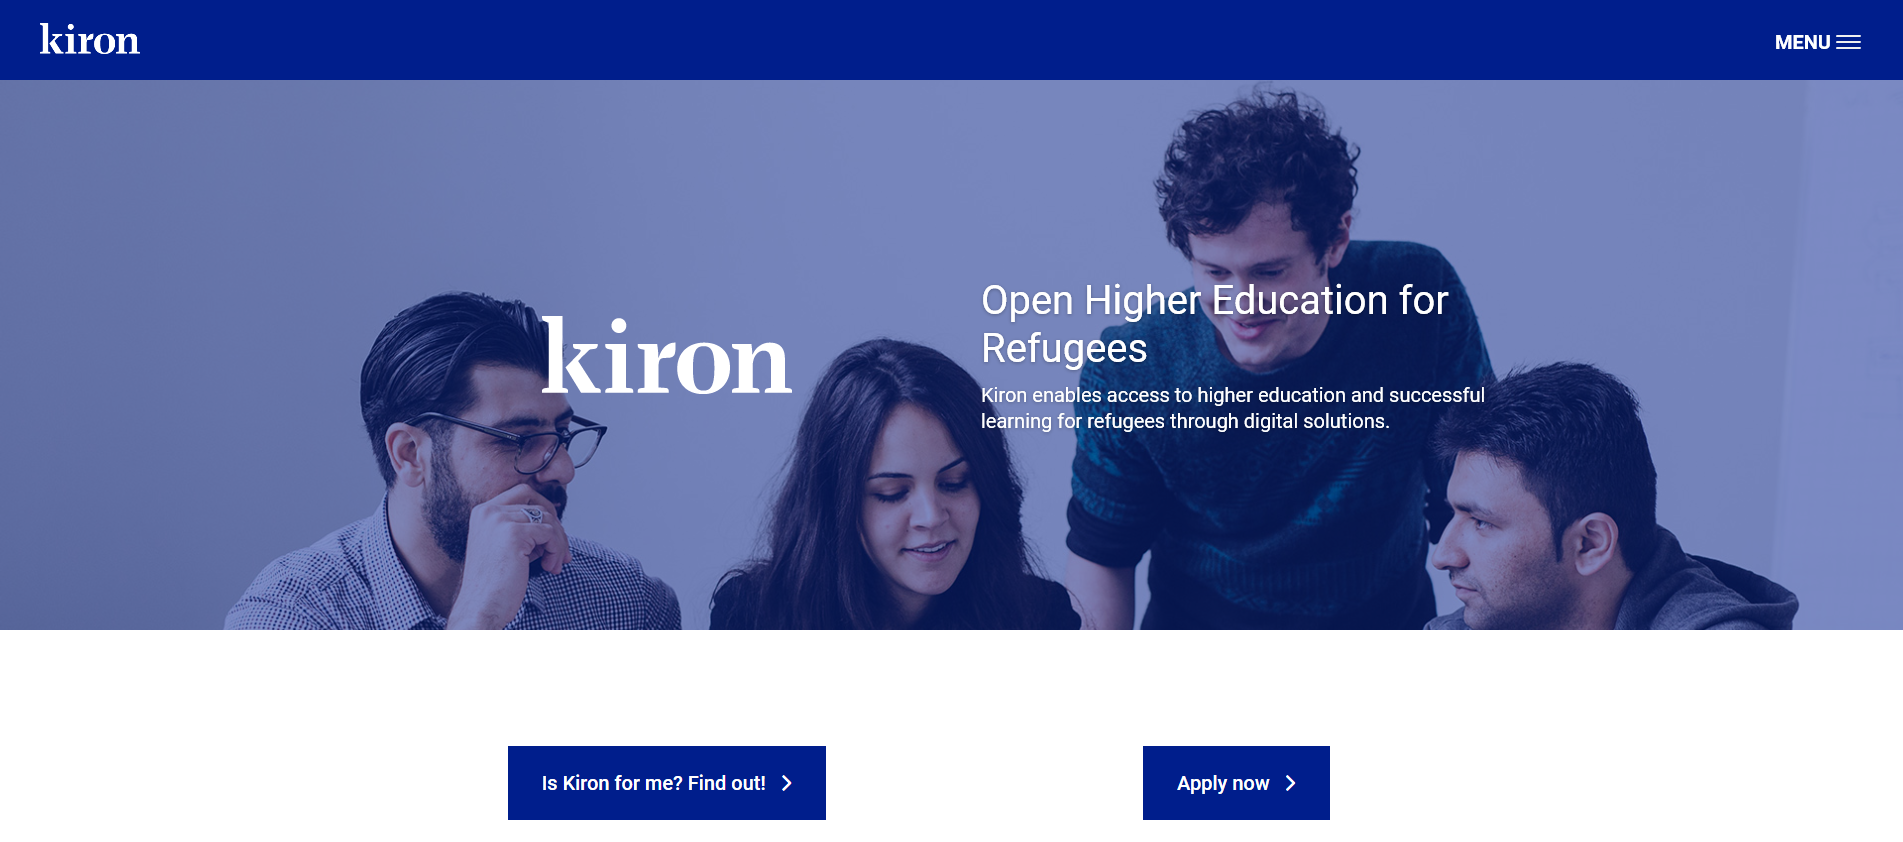 Kiron (Open Higher Education for Refugees)